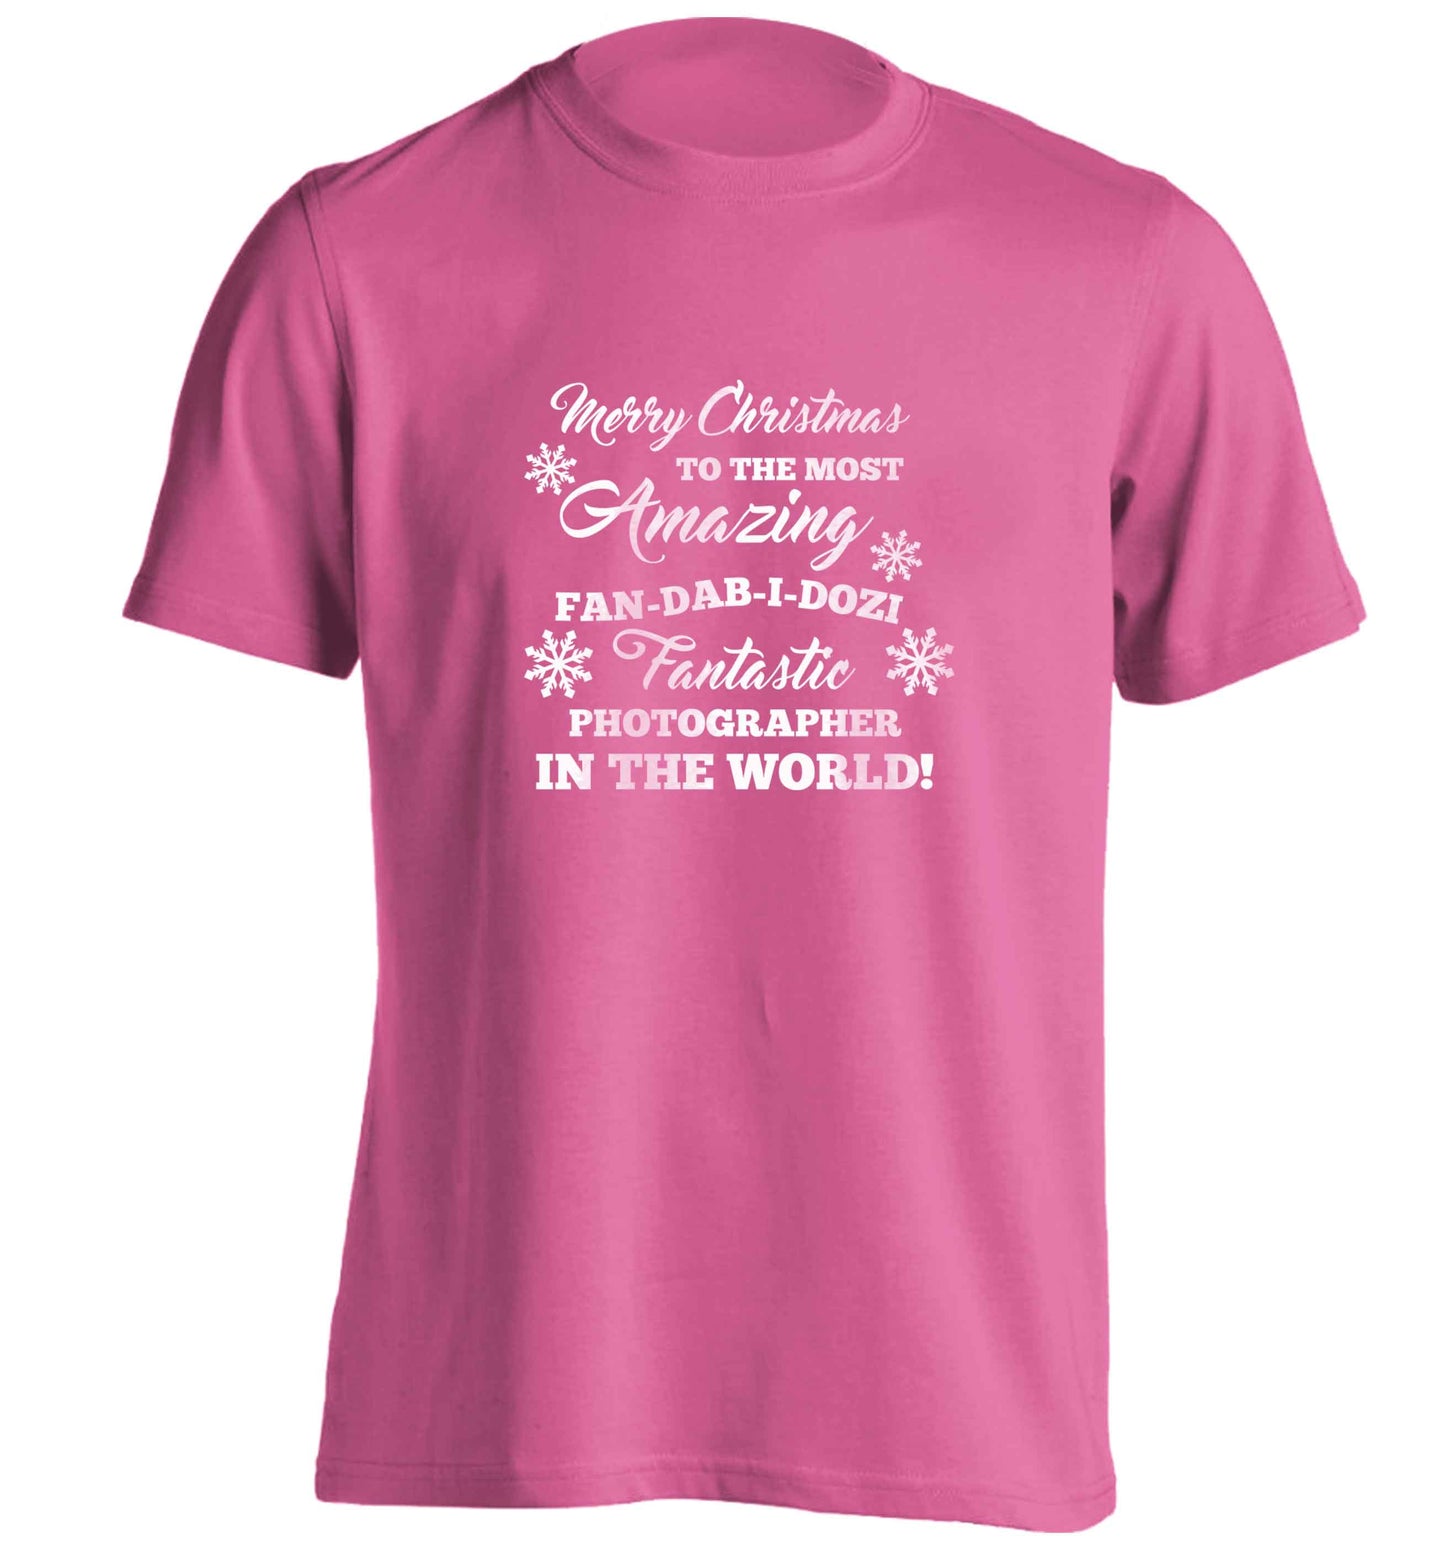 Merry Christmas to the most amazing fan-dab-i-dozi fantasic photographer in the world adults unisex pink Tshirt 2XL